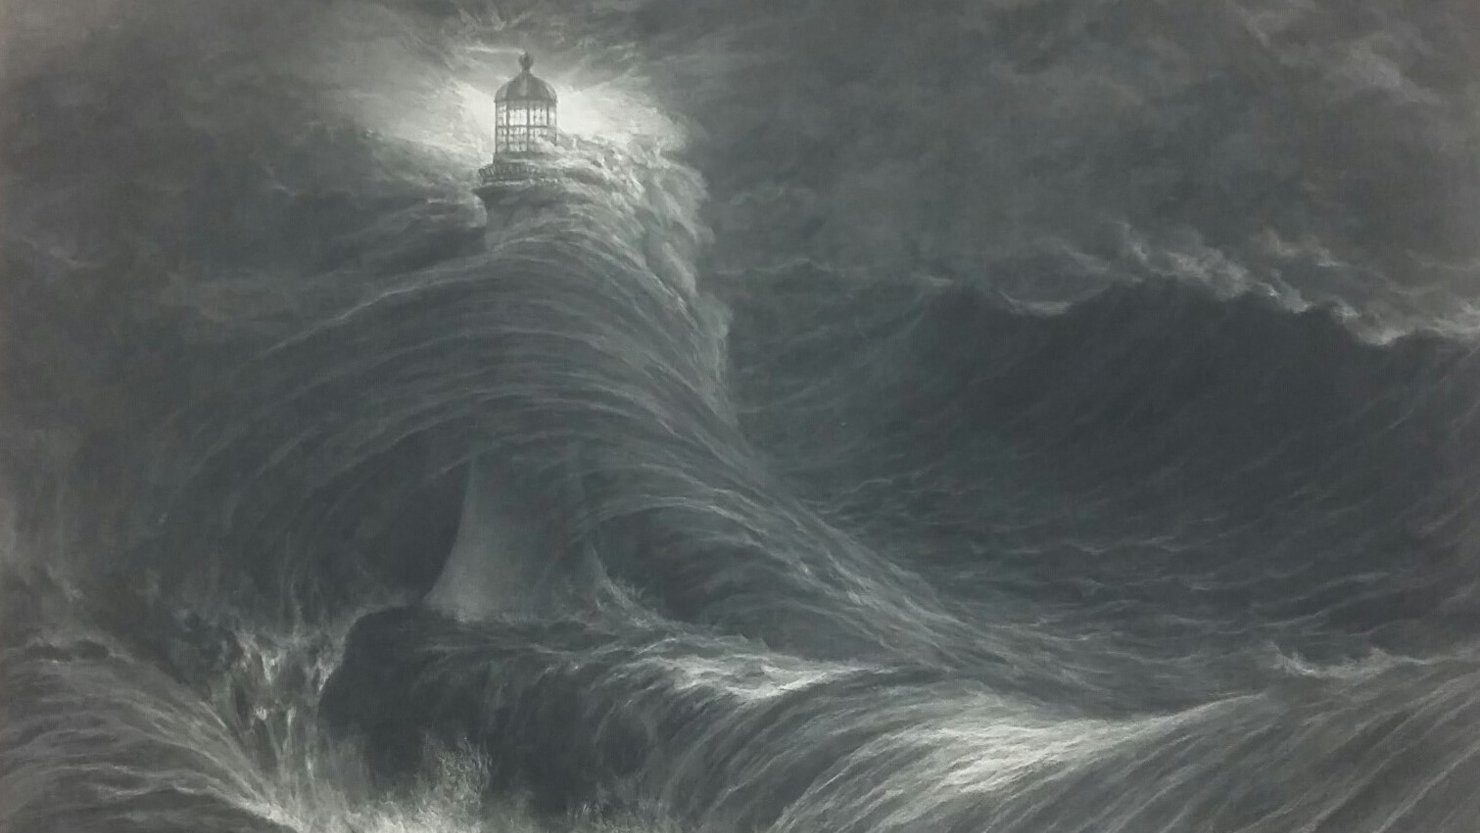 Print (detail) of William Daniell's ‘Eddystone Lighthouse, During a Storm’